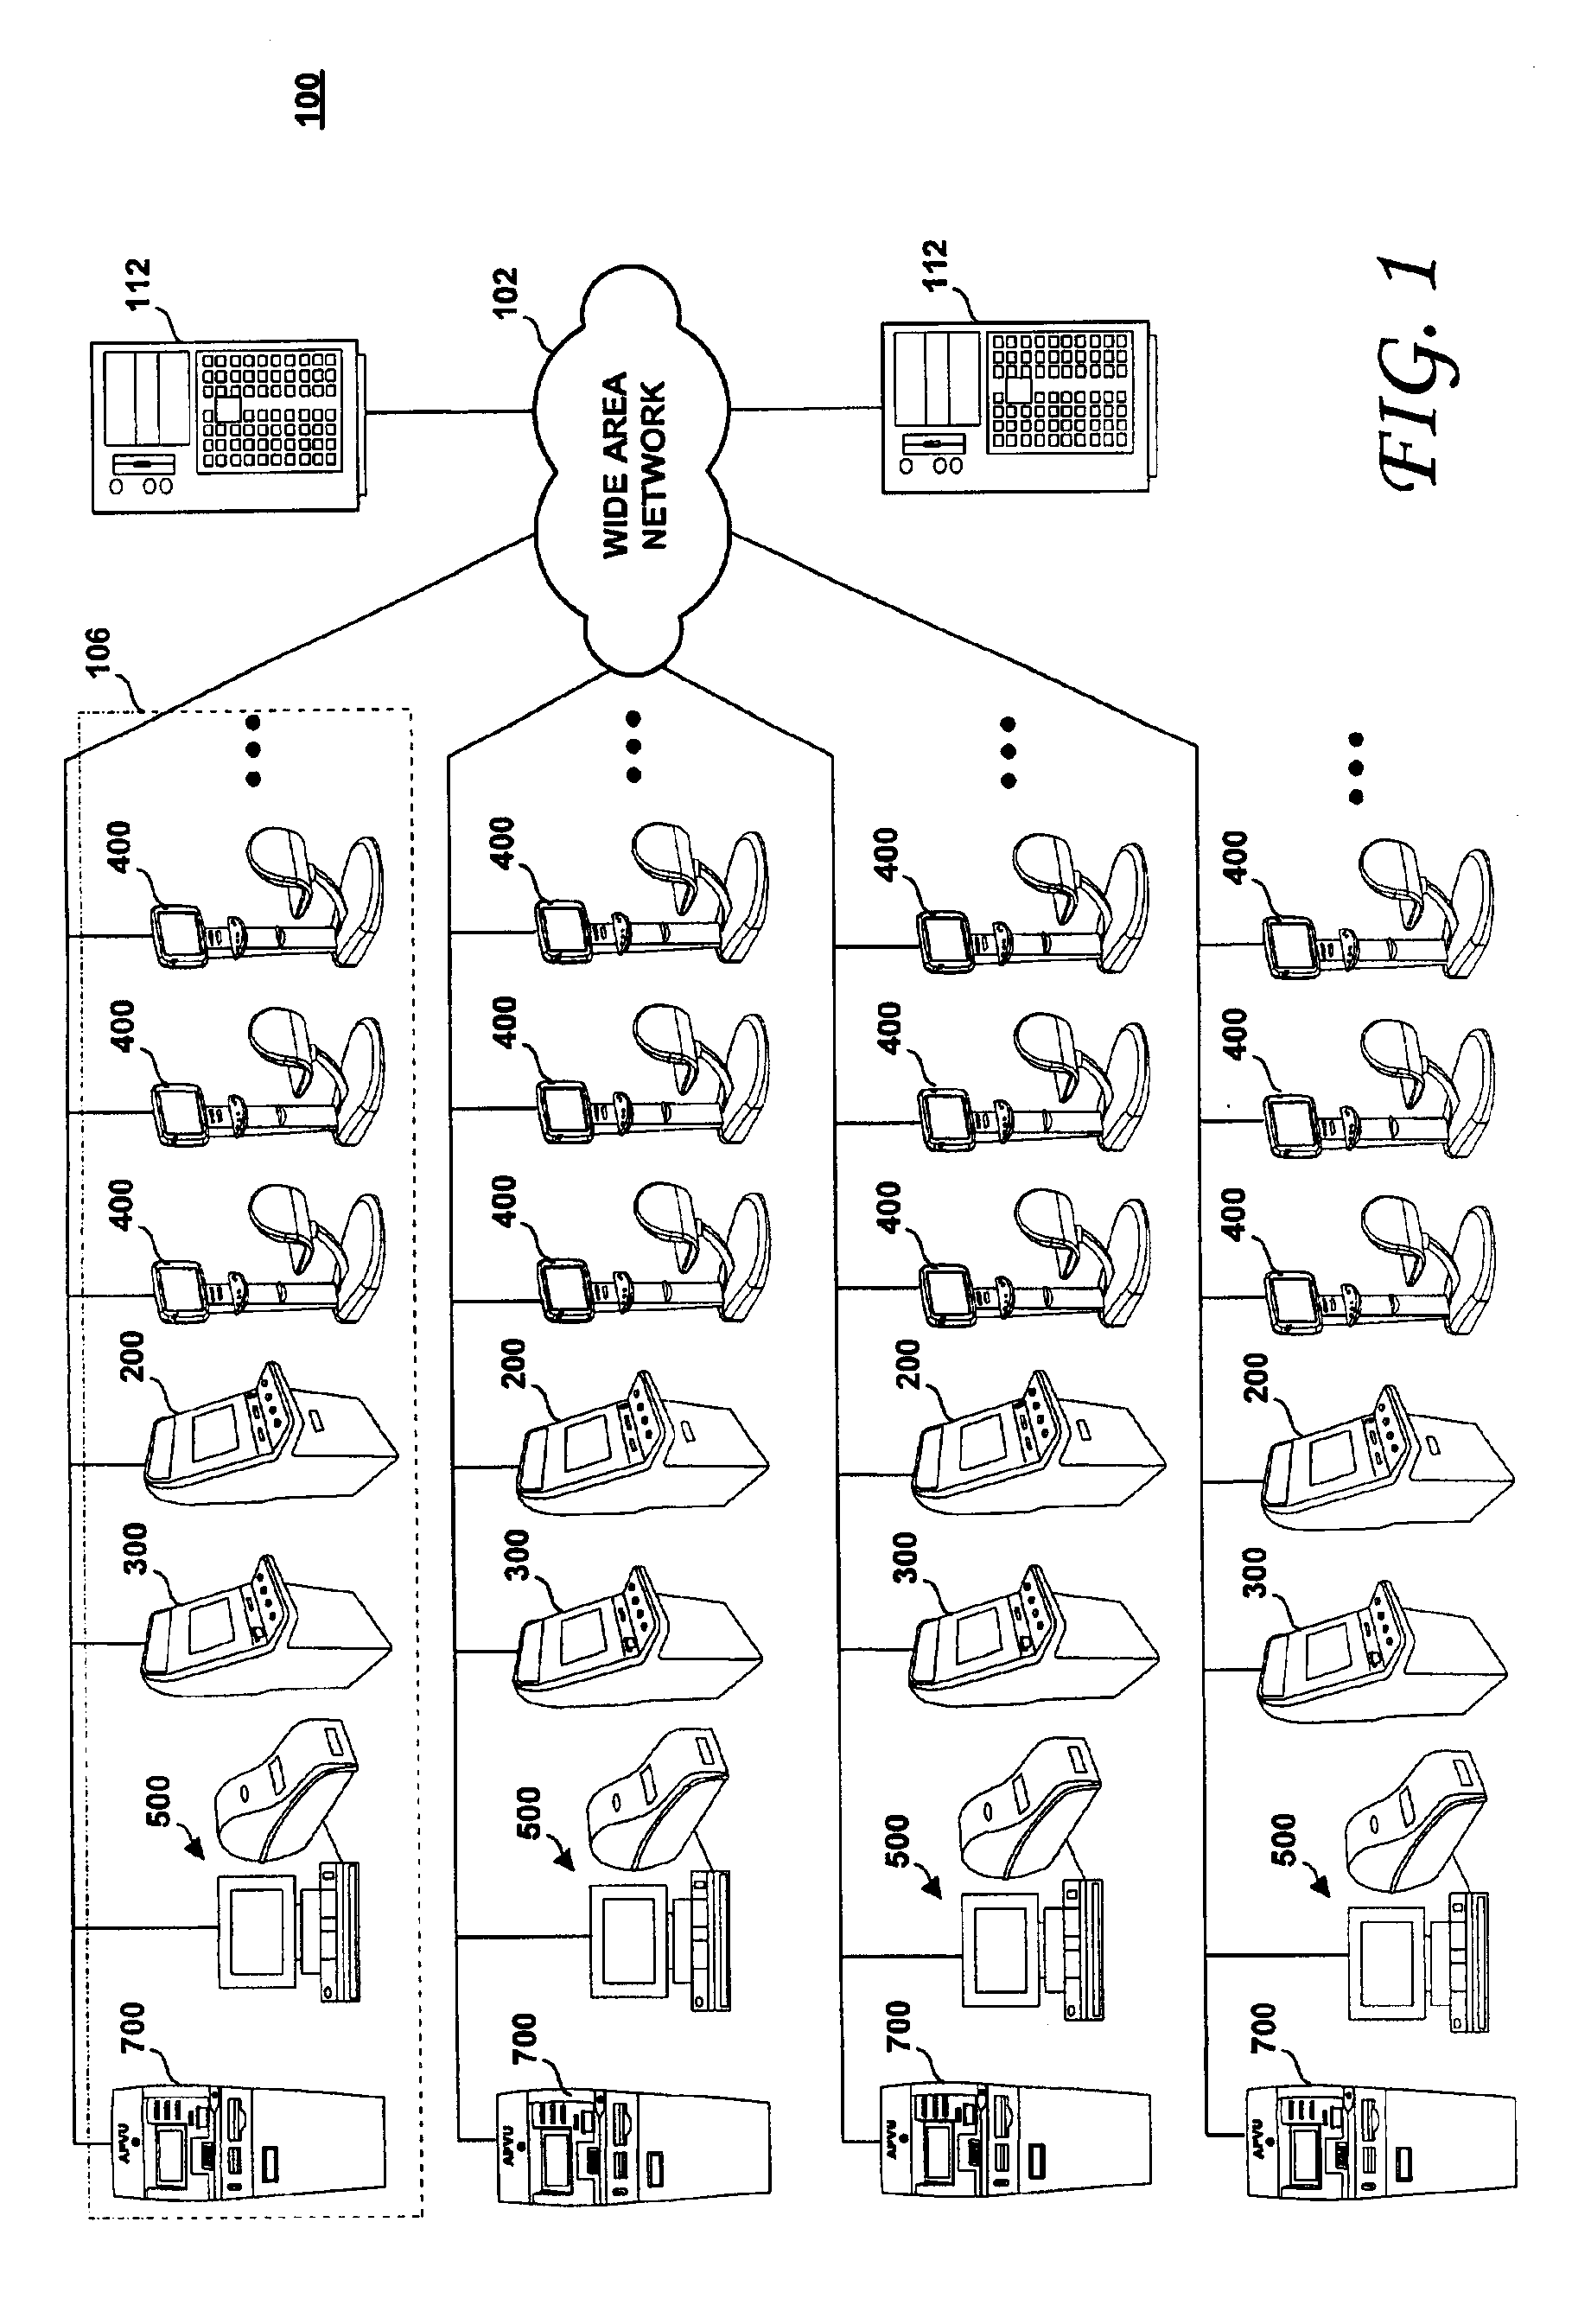 Modular entertainment and gaming system configured for network boot, network application load and selective network computation farming